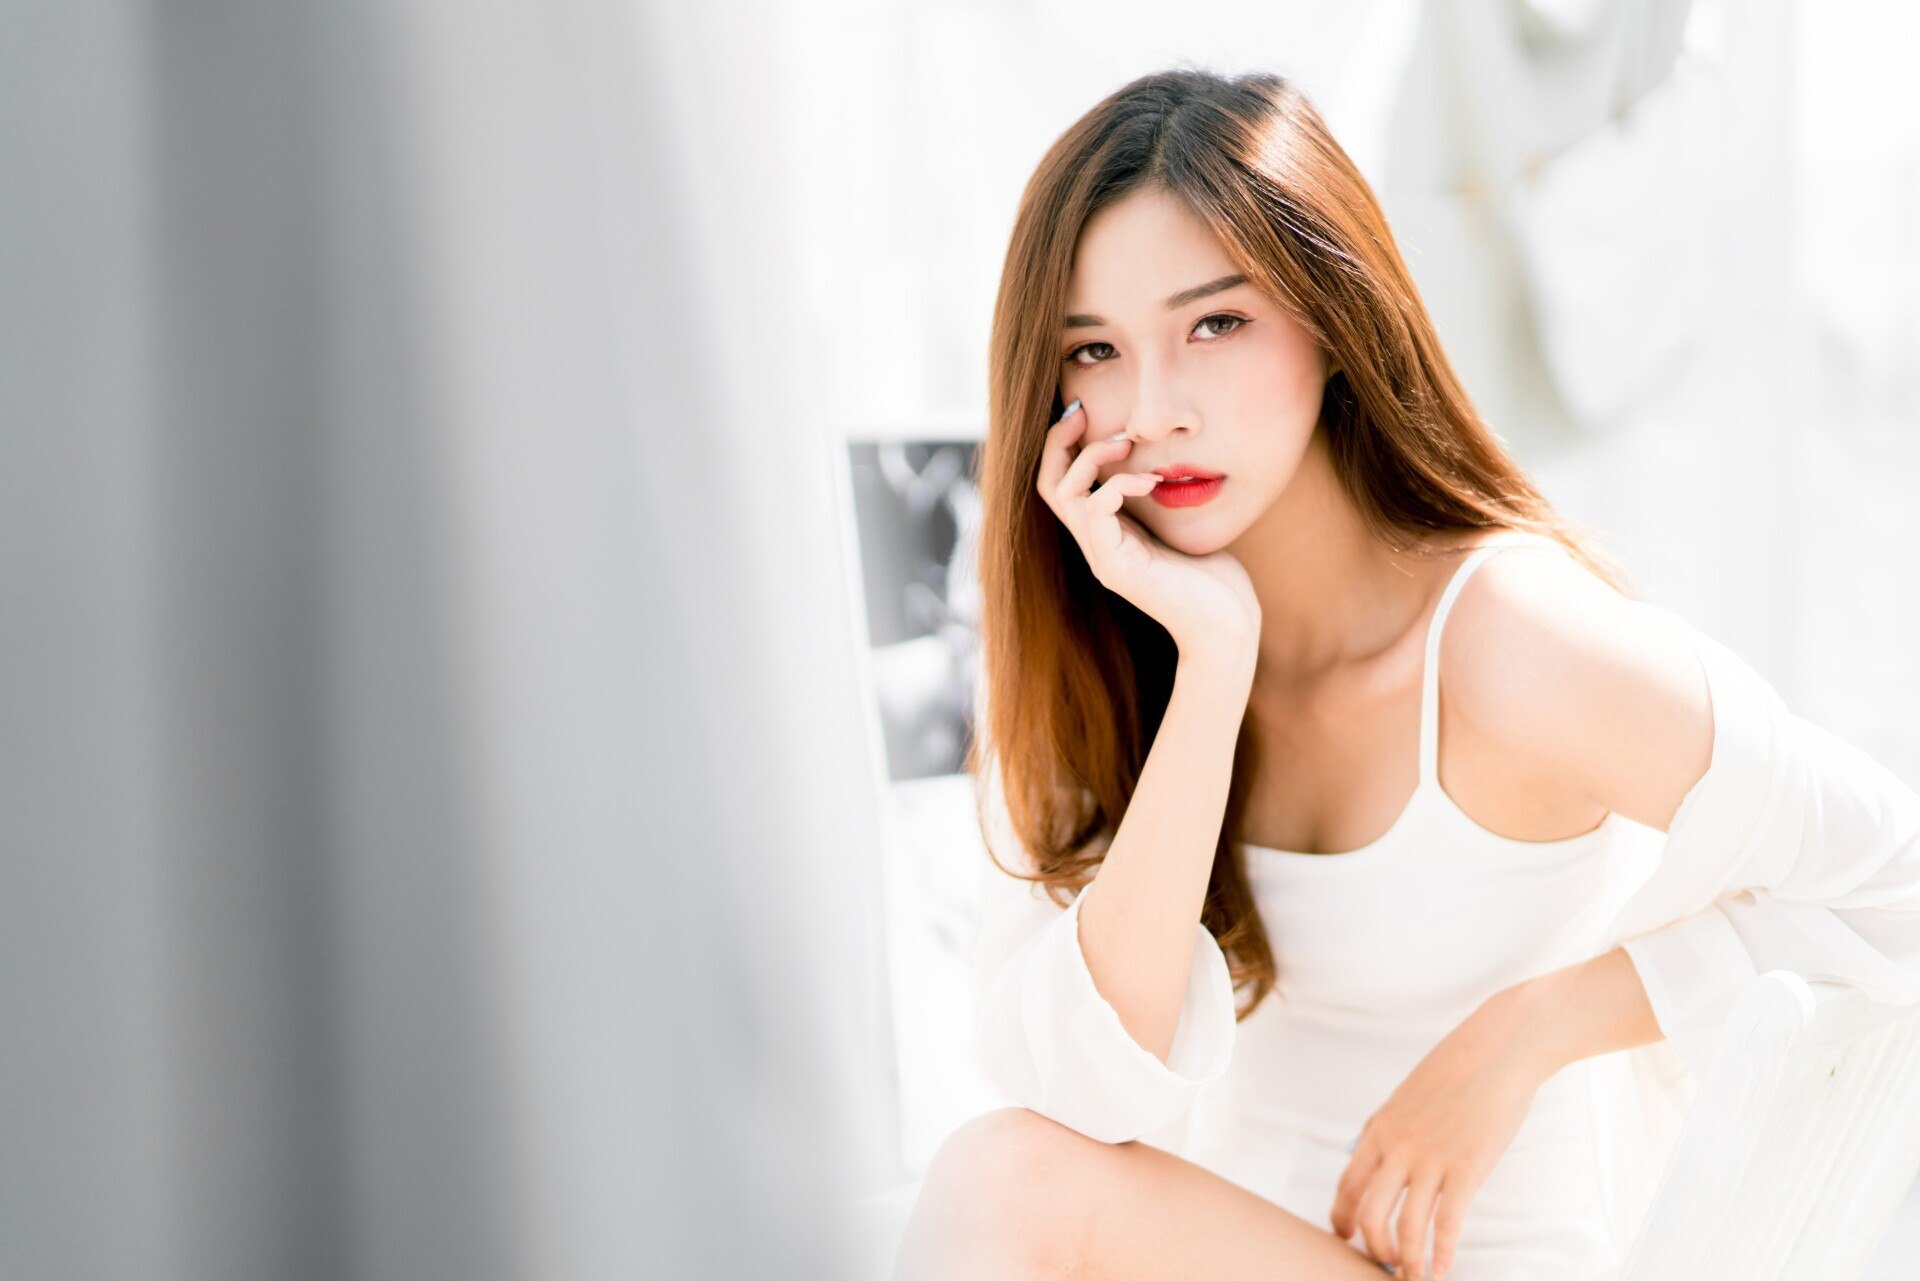 Thailand Mail Order Bride – Are They Good For Marriage?